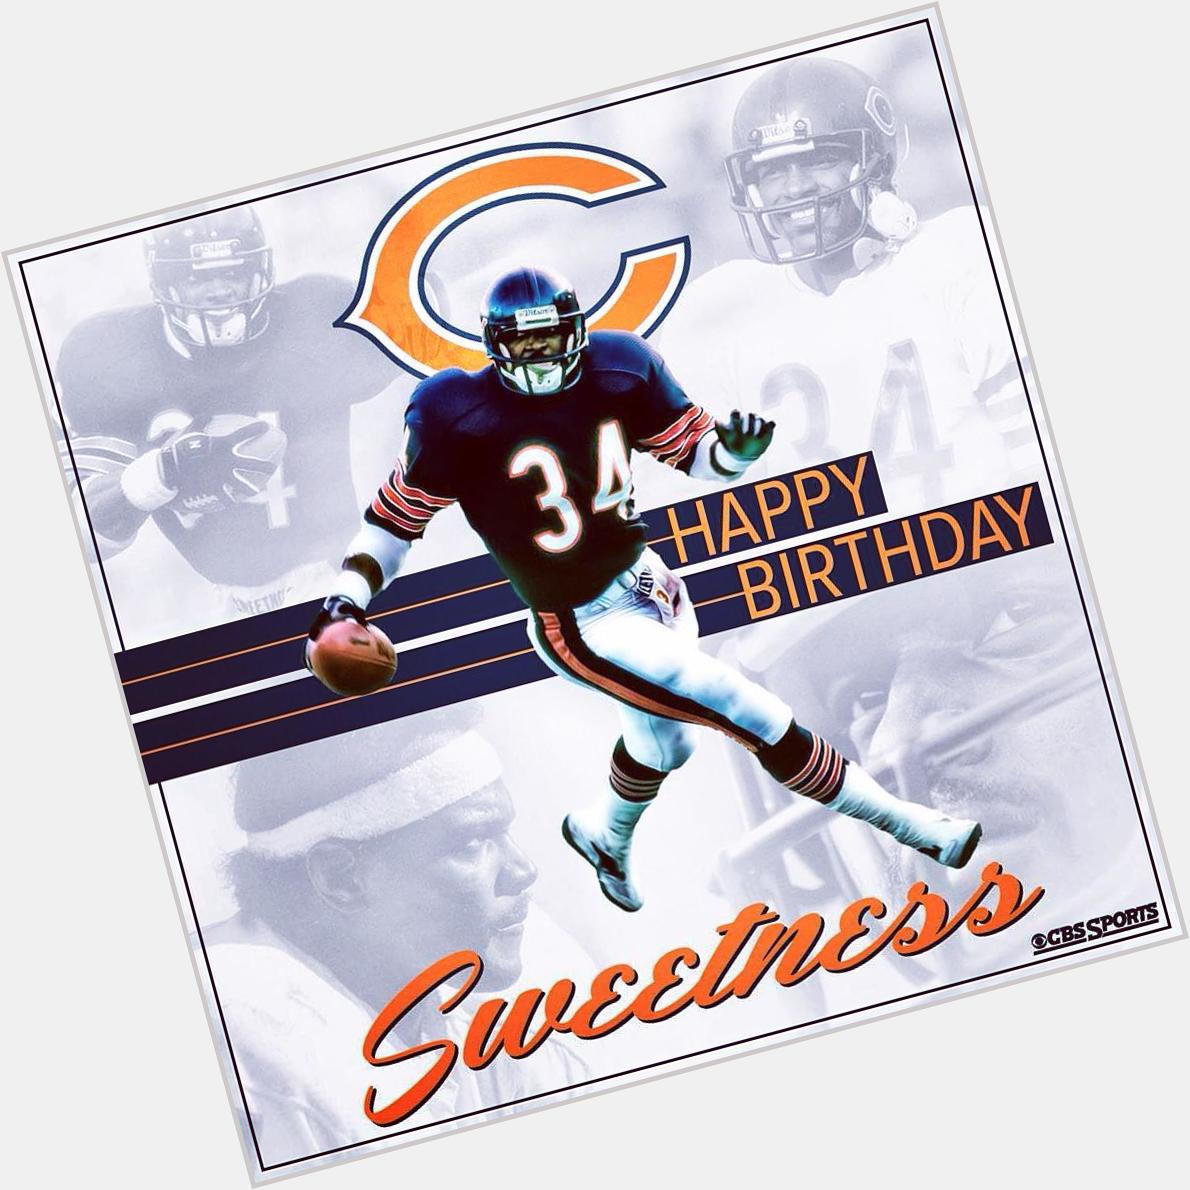 Happy Birthday to Walter Payton.  The \"Best RB\" that ever played the game.
\"WP34\" 